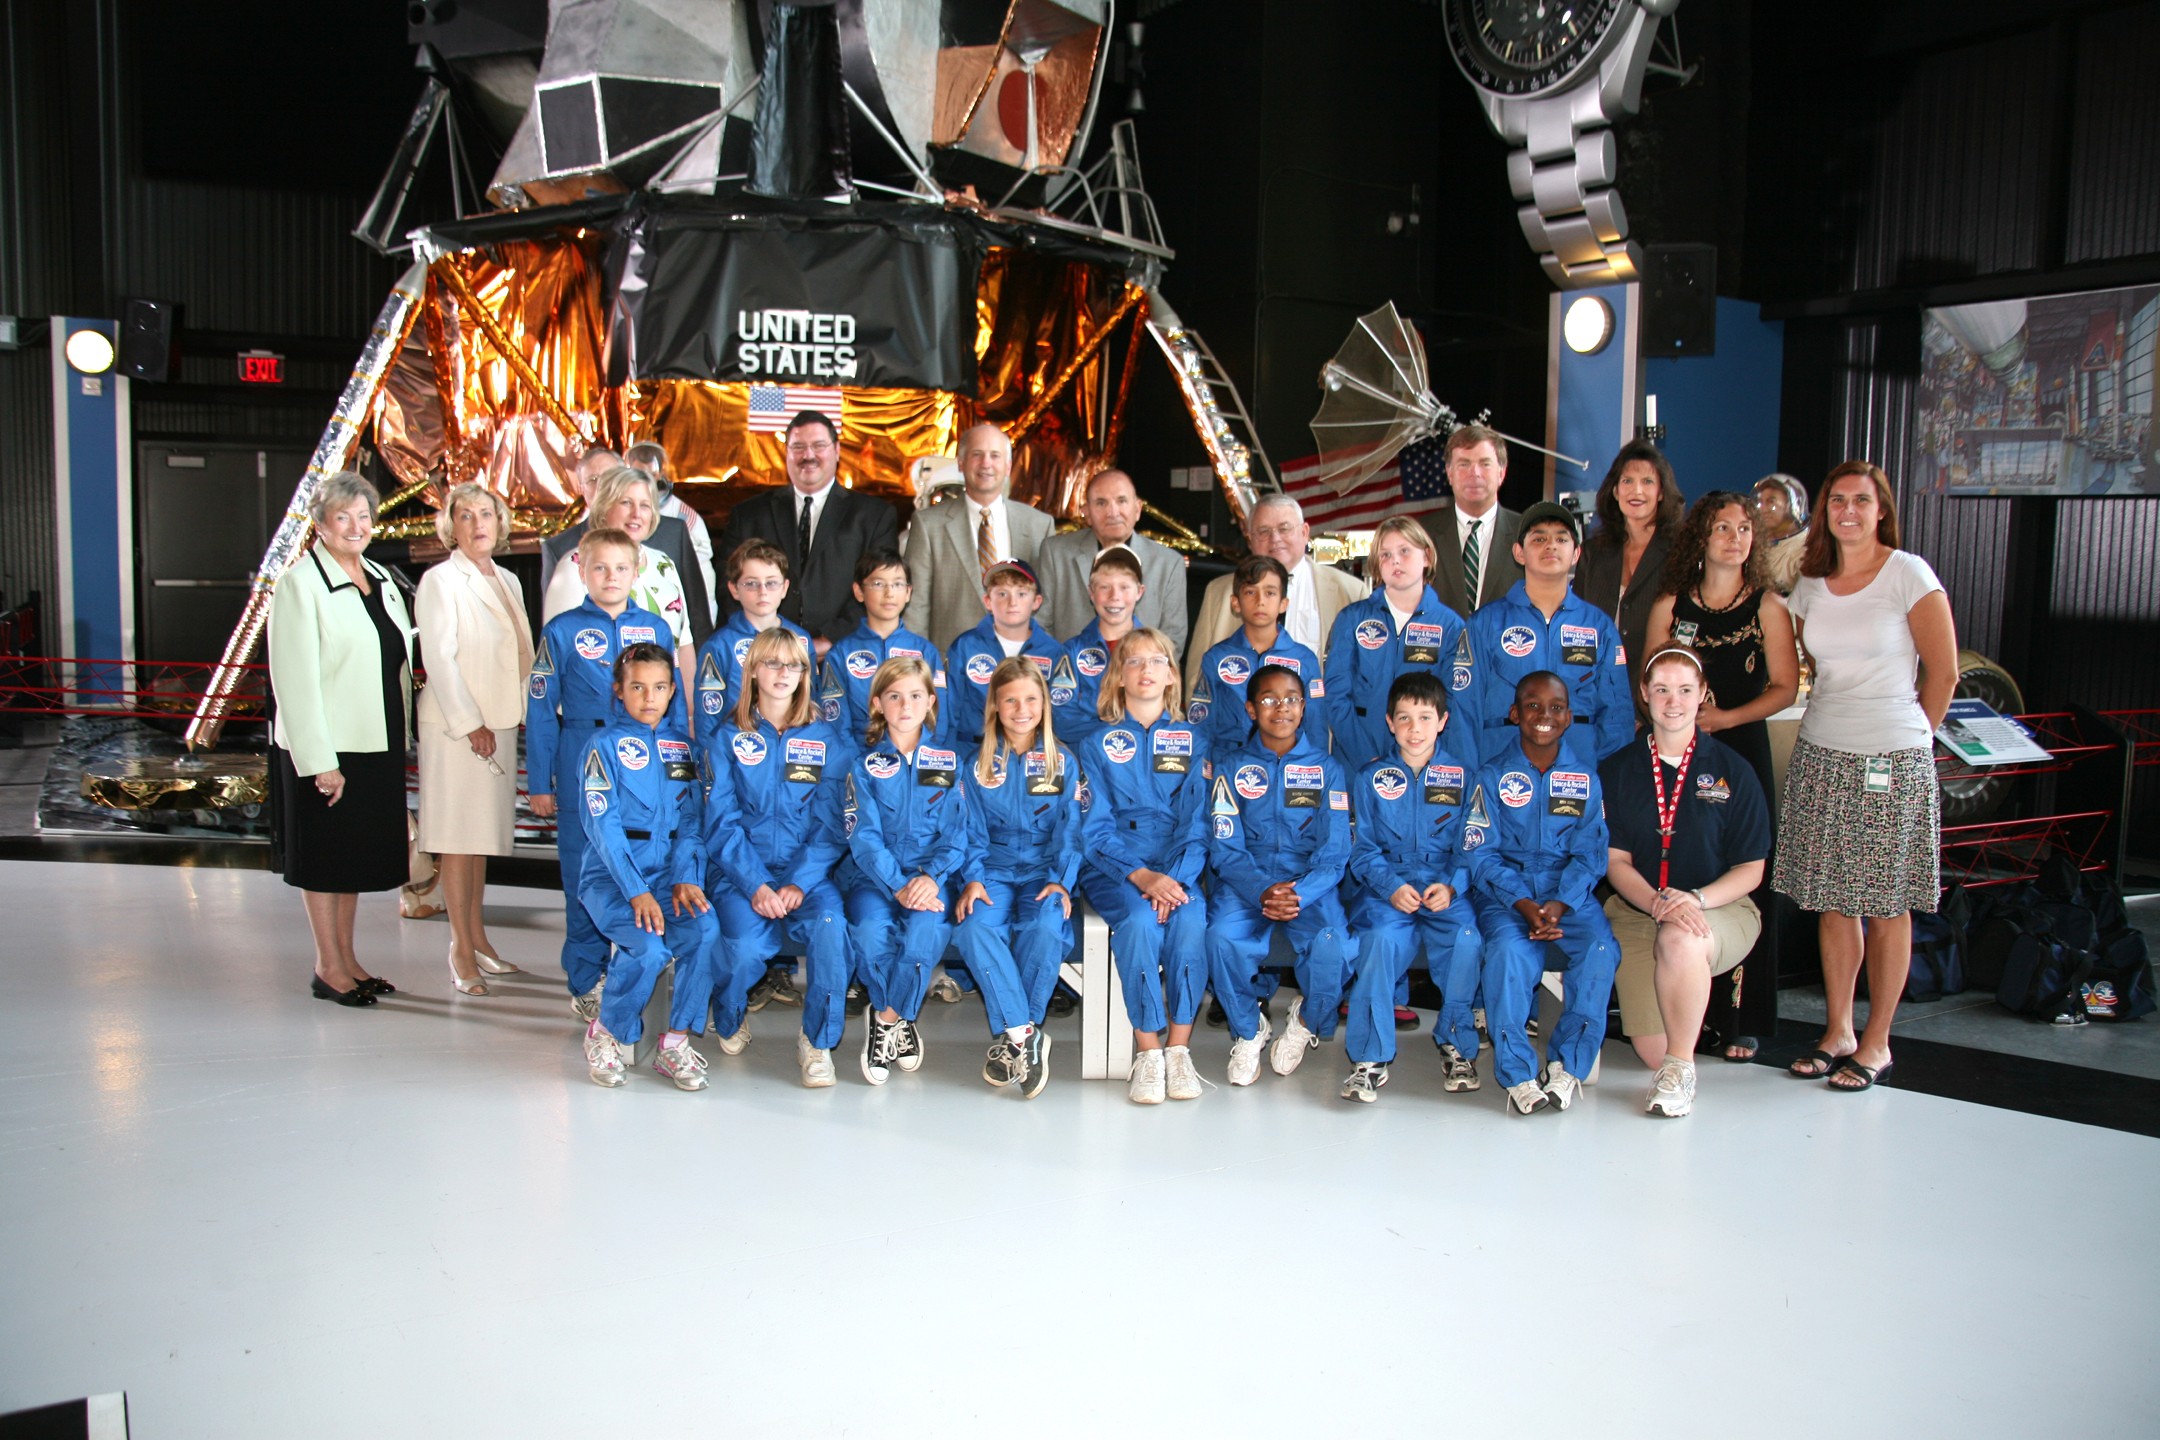 Space Camp Encourages Children to Explore Science Article The